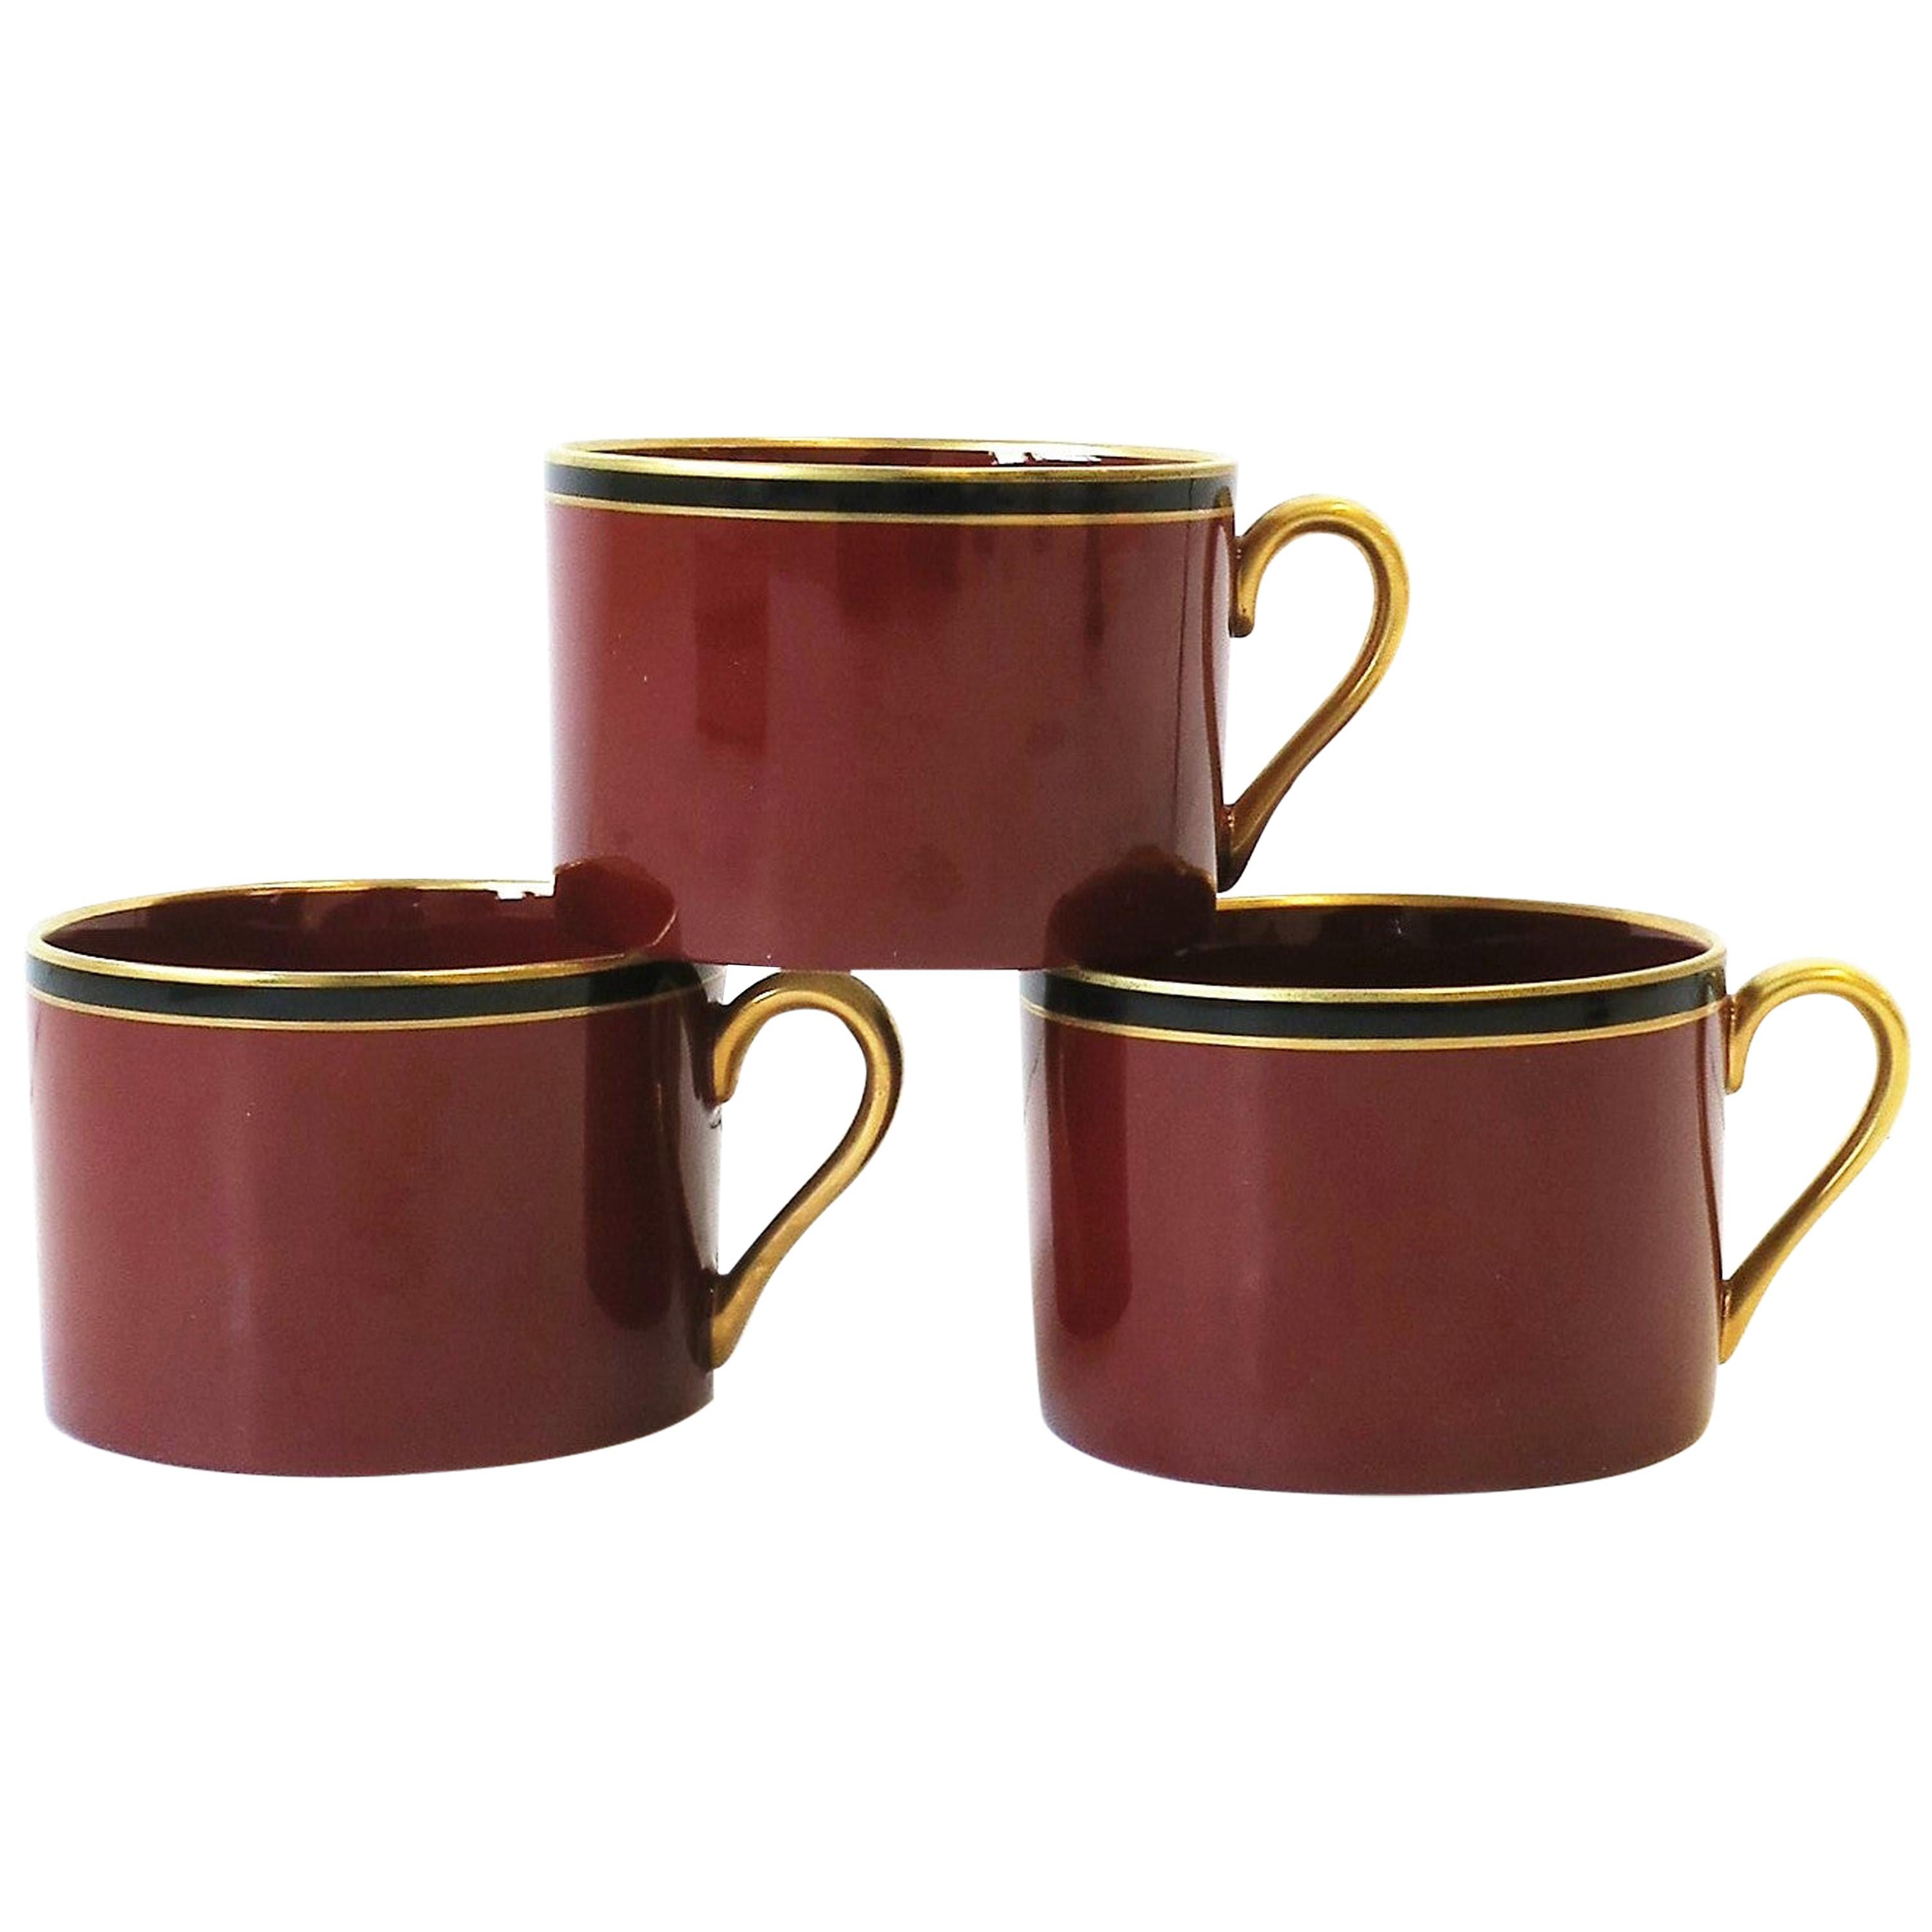 Red Burgundy, Gold and Black Porcelain Coffee or Tea Cups, Set of 3, 1967 For Sale